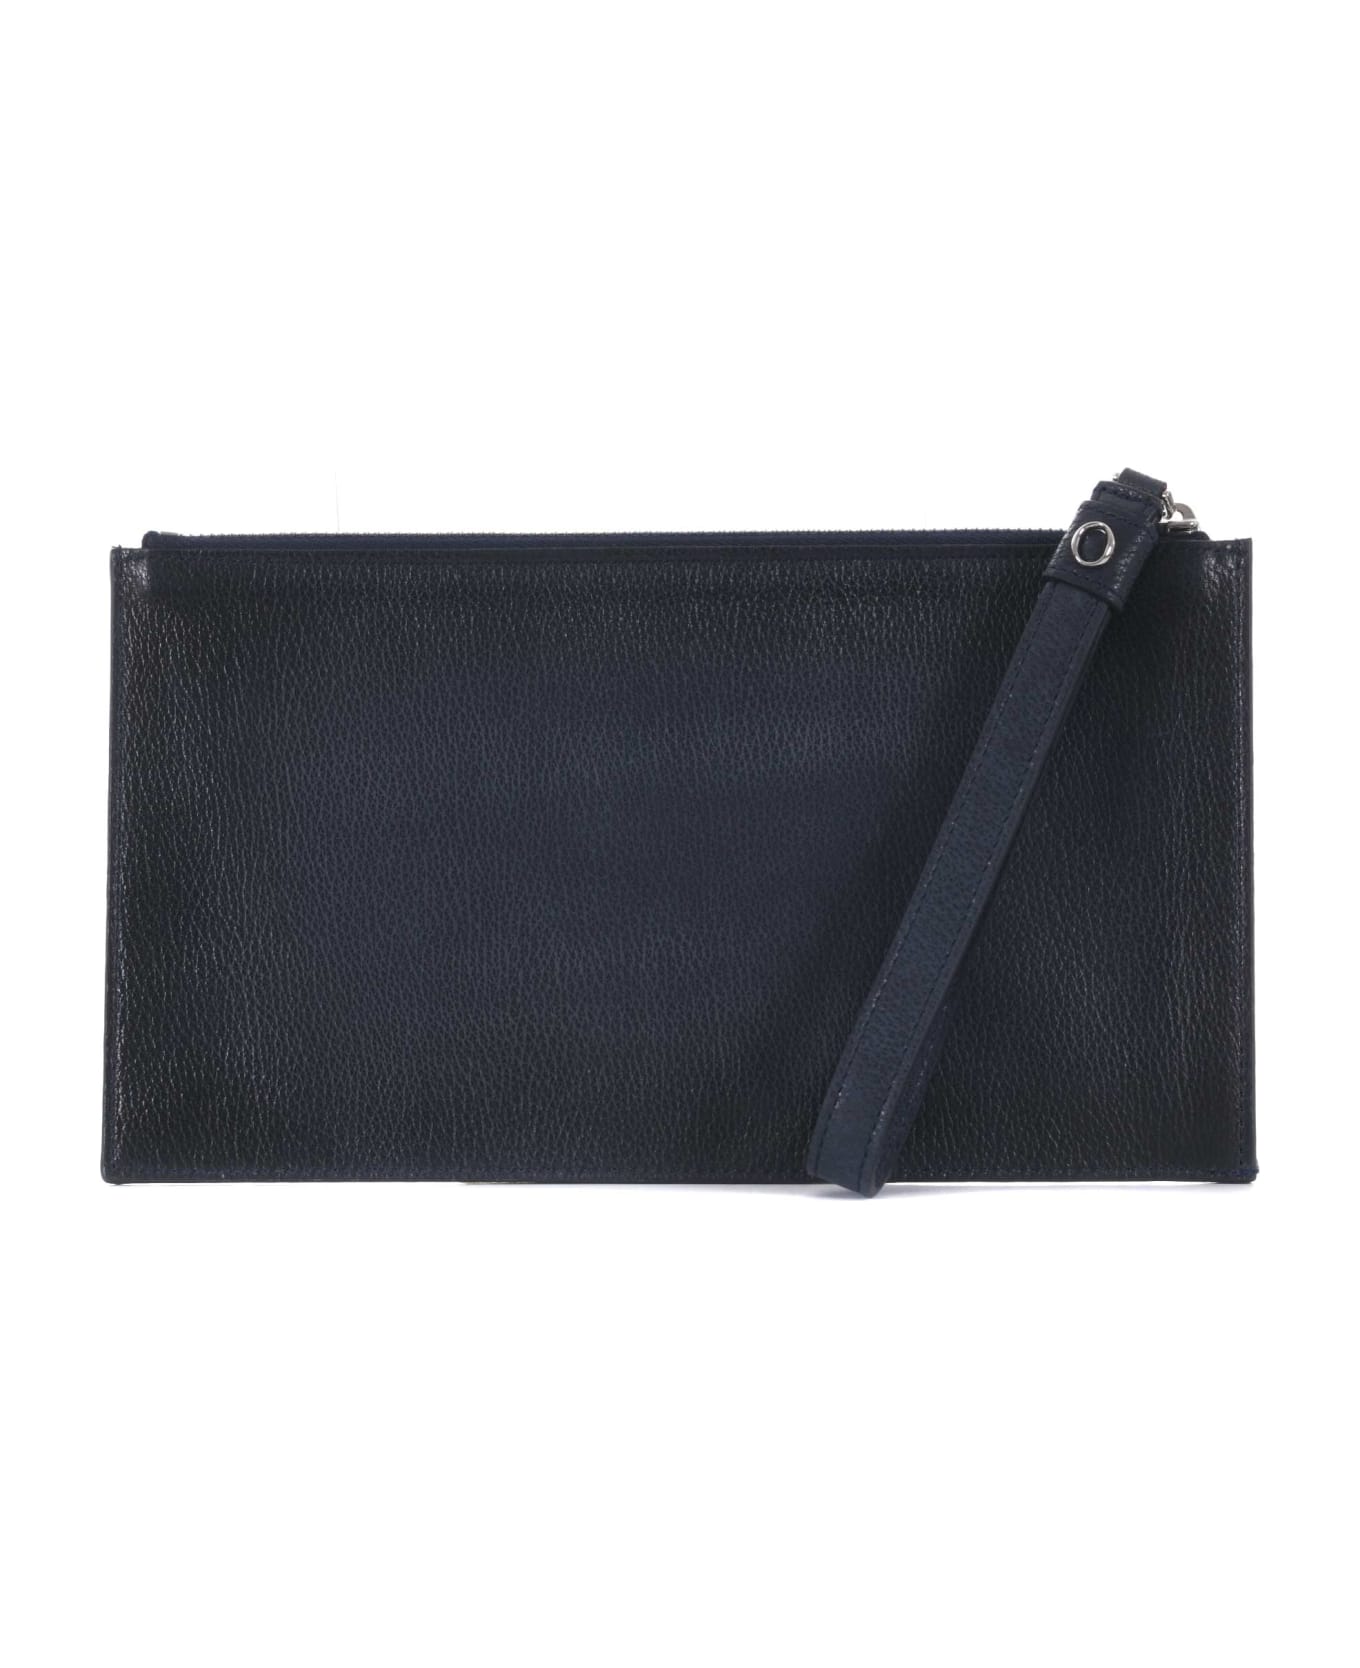 Orciani Clutch Bag - Blu scuro トラベルバッグ